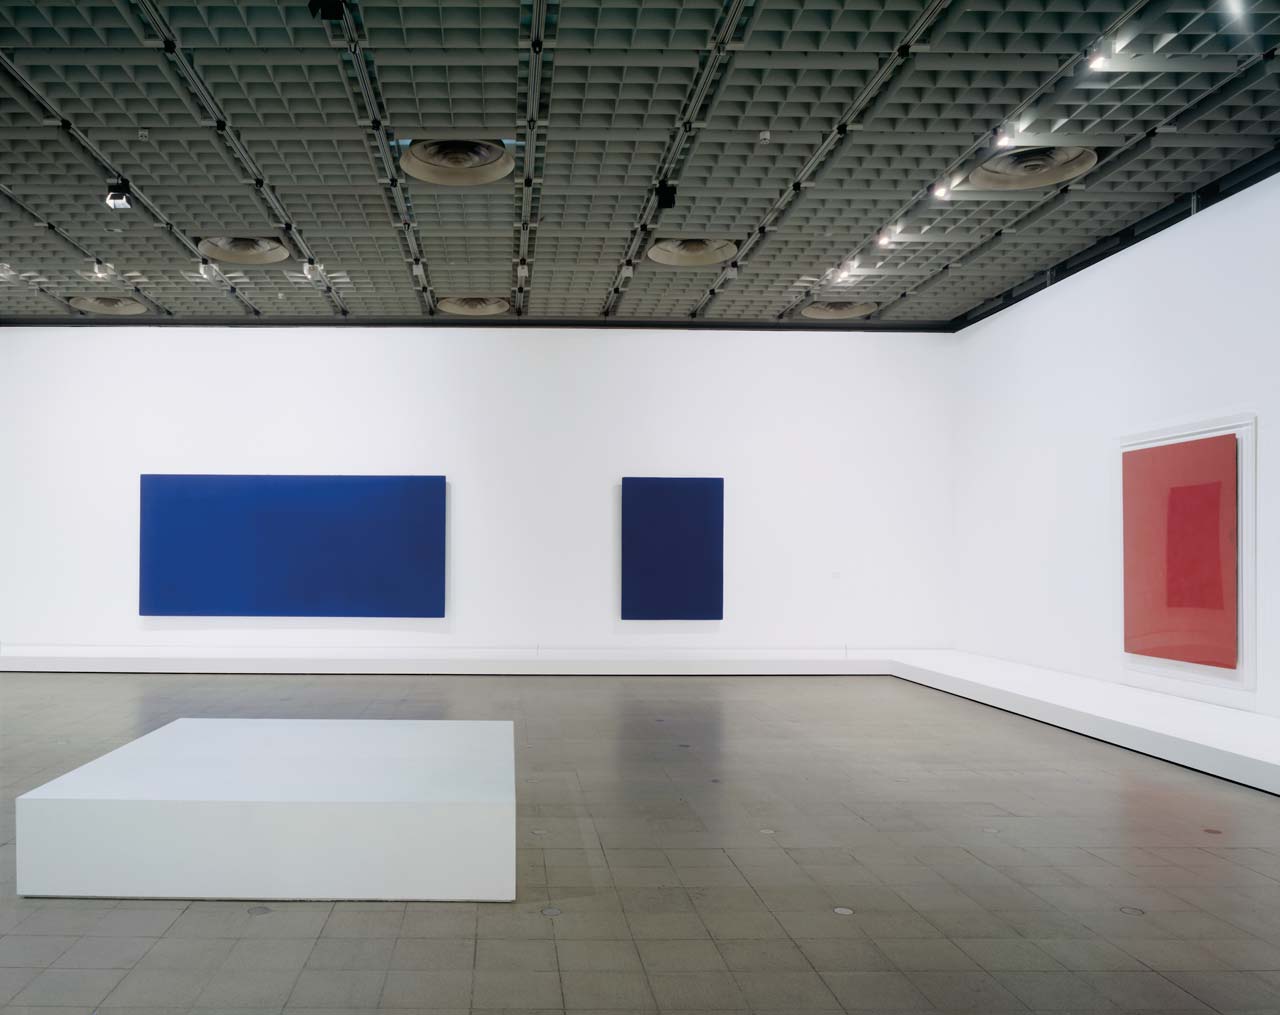 View of the exhibition "Yves Klein", Hayward Gallery, 1995